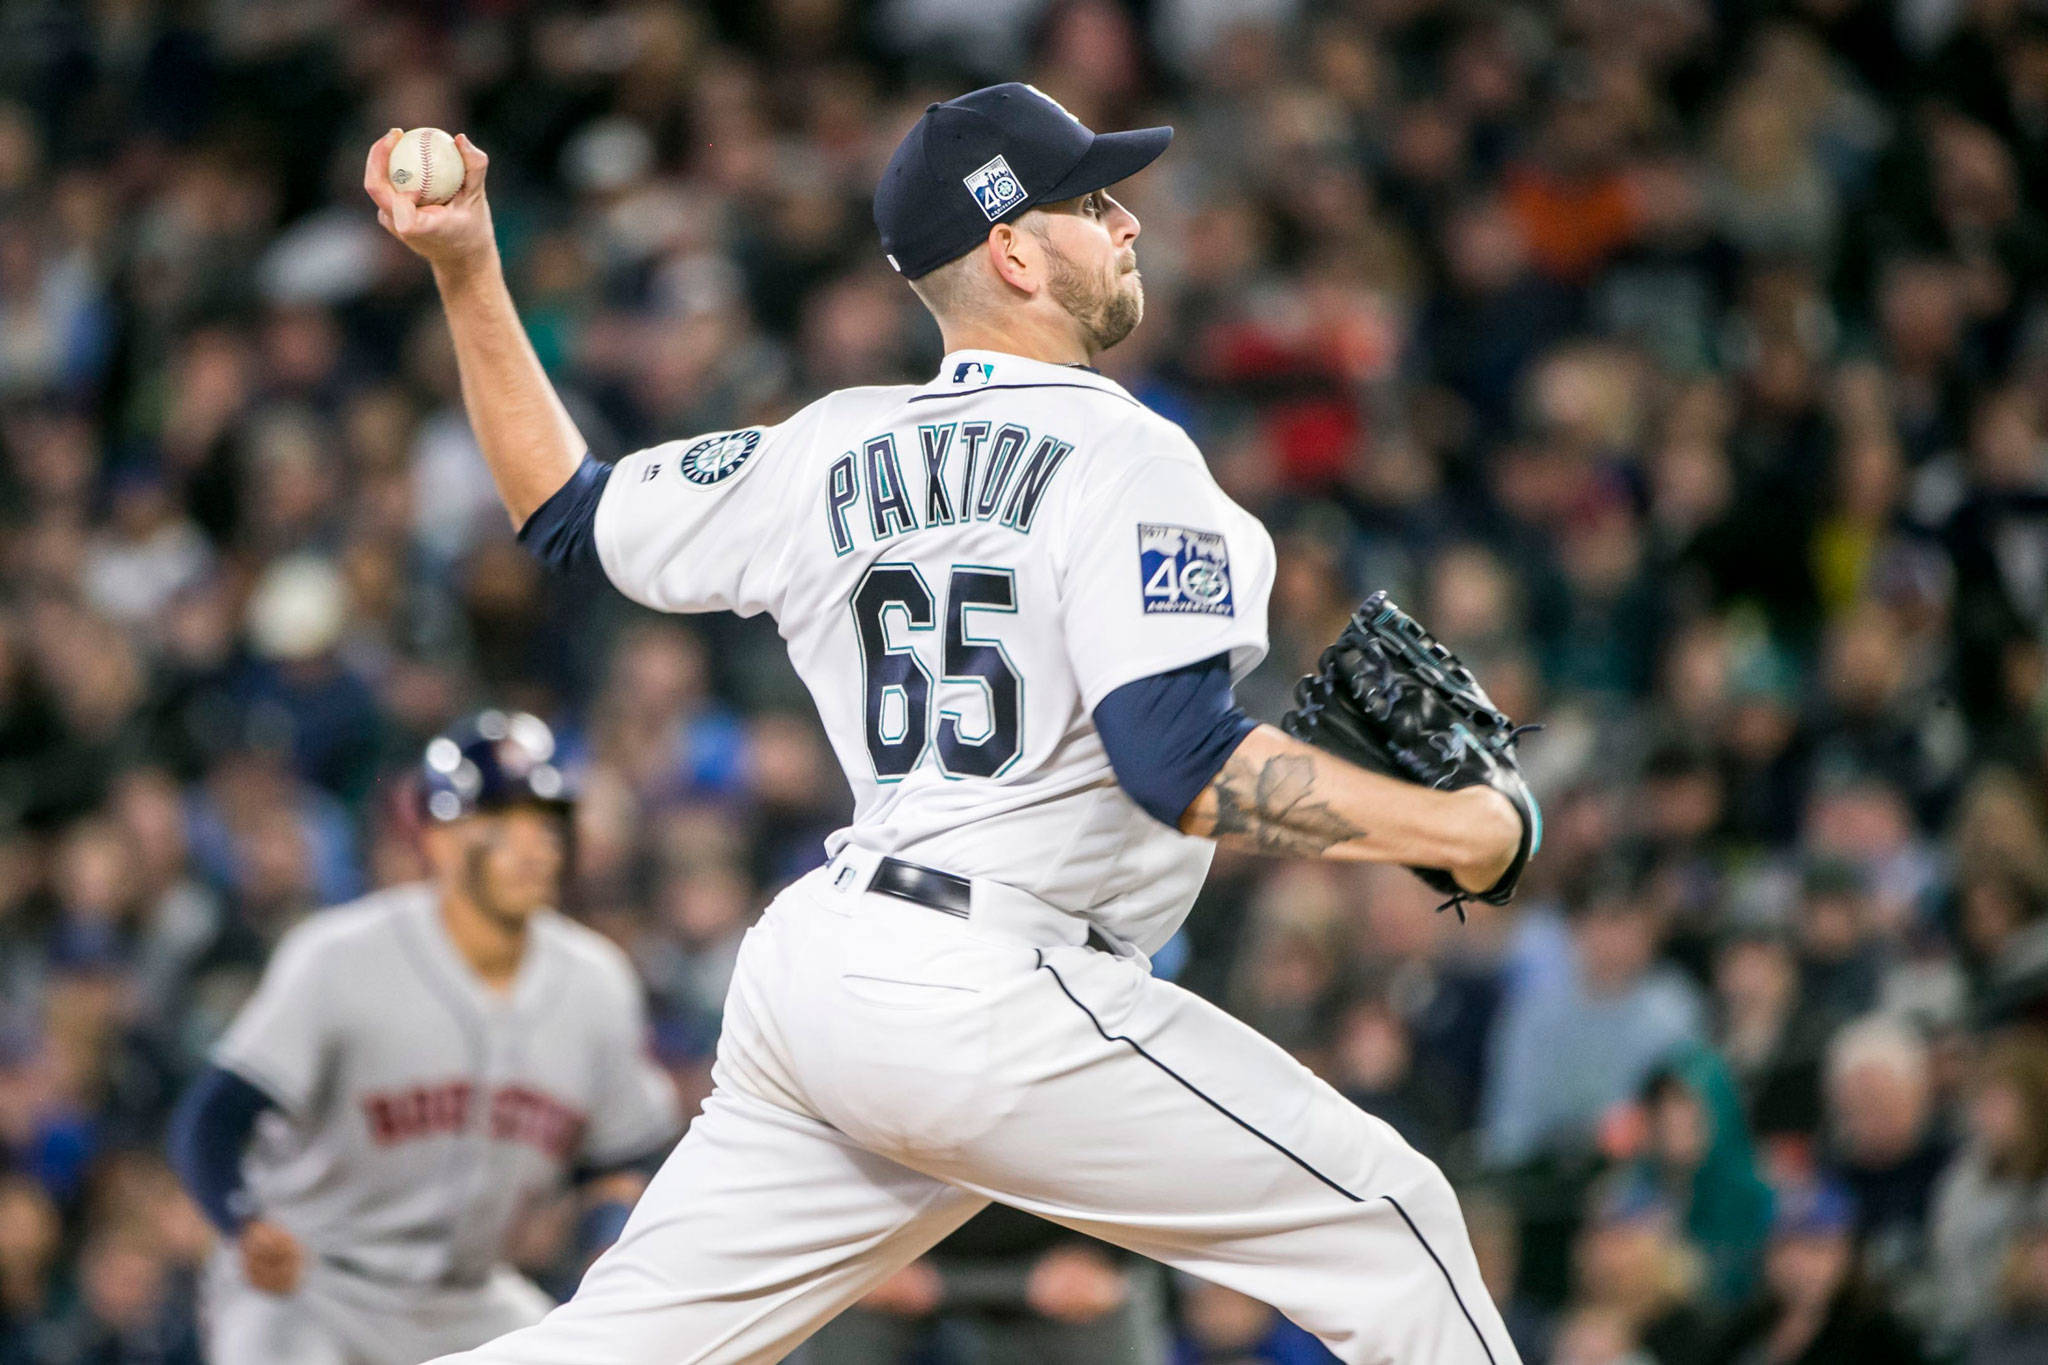 (Bettina Hansen | Seattle Times) James Paxton, seen here throwing against Houston earlier this season, struck out nine in seven innings and propelled Seattle to an 8-0 win over Detroit on Wednesday.